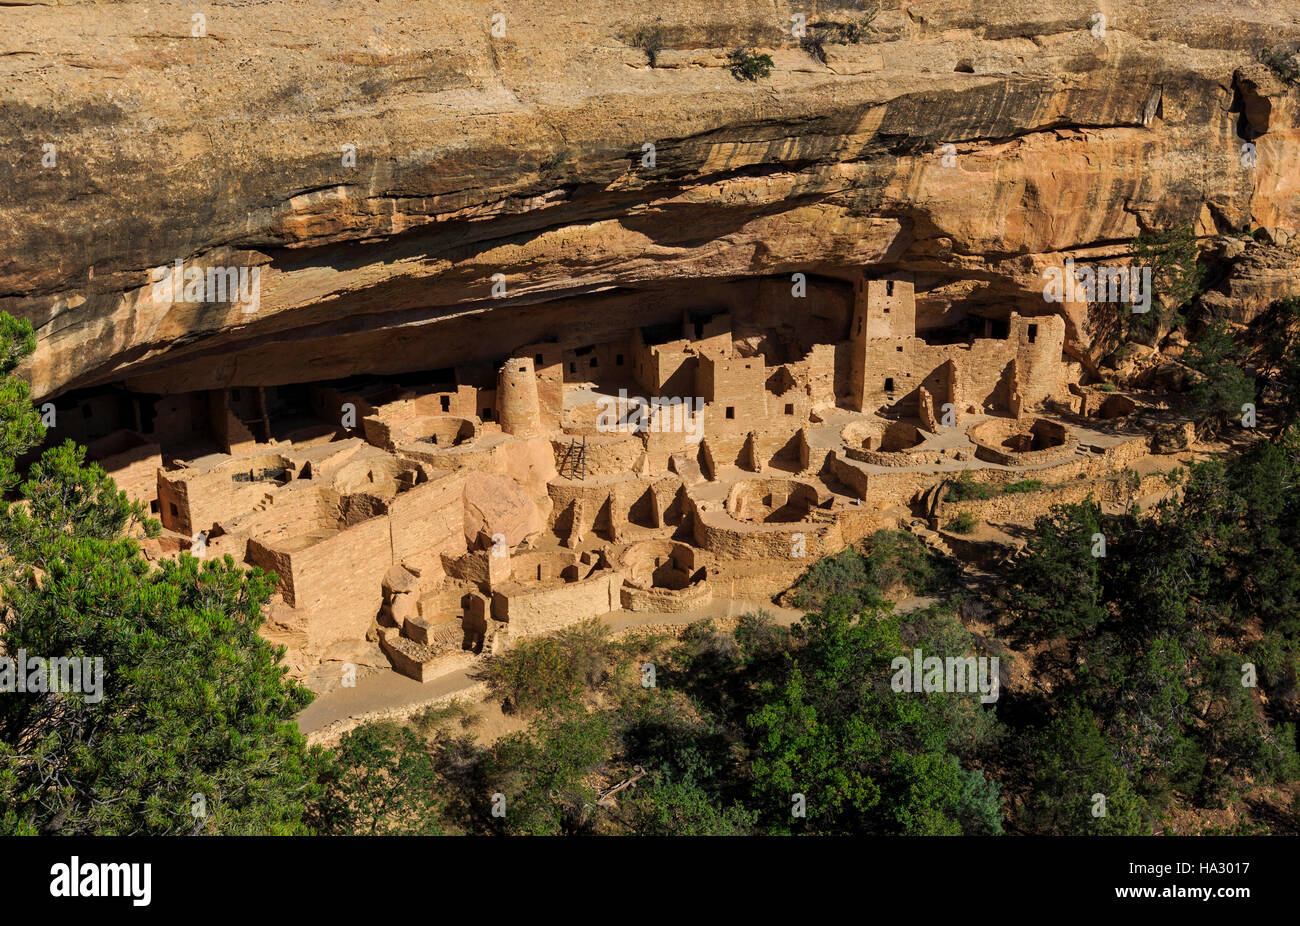 This is a view of the Cliff Palace, the largest cliff dwelling at Mesa Verde National Park, Colorado, USA. Stock Photo